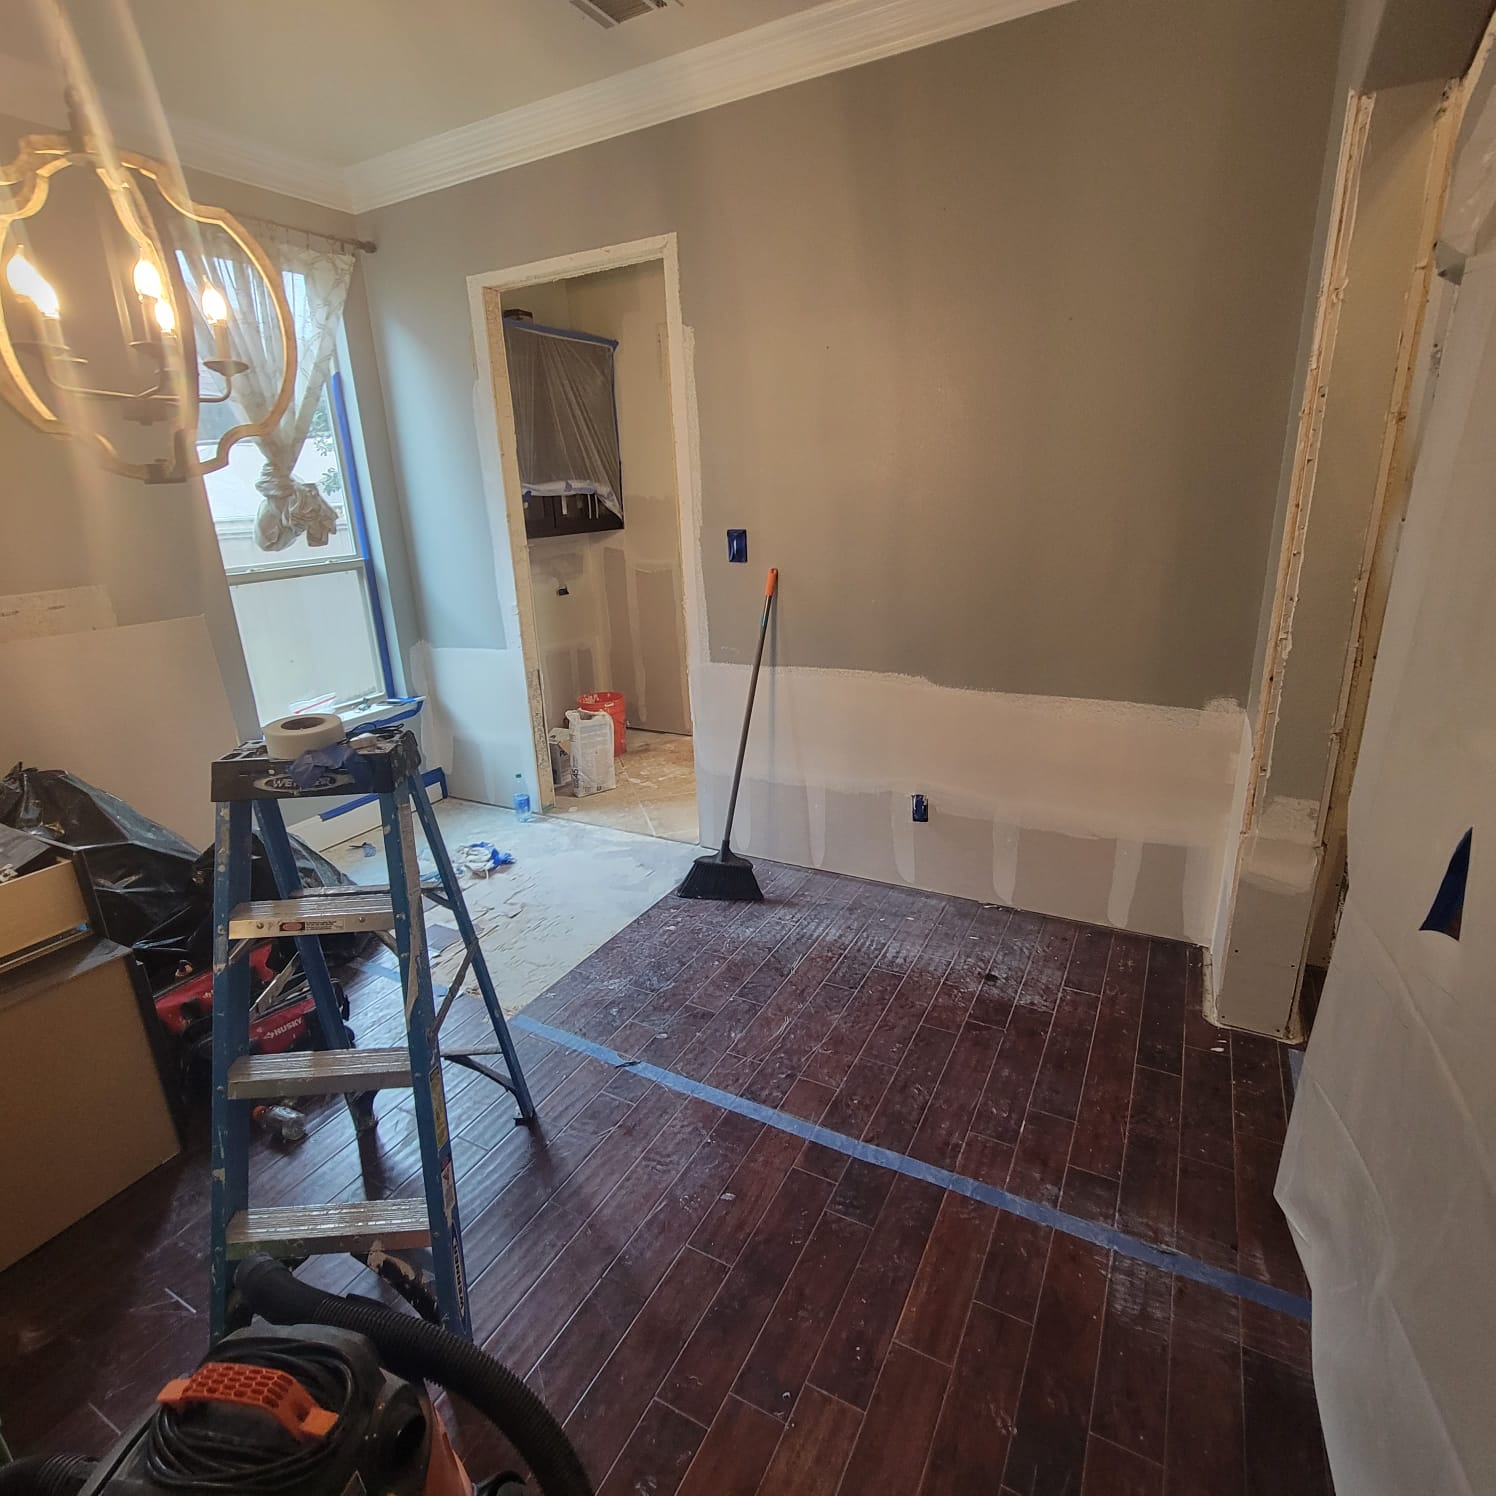 Installing New Drywall after 2\' Ripped Out Due to Water Damage